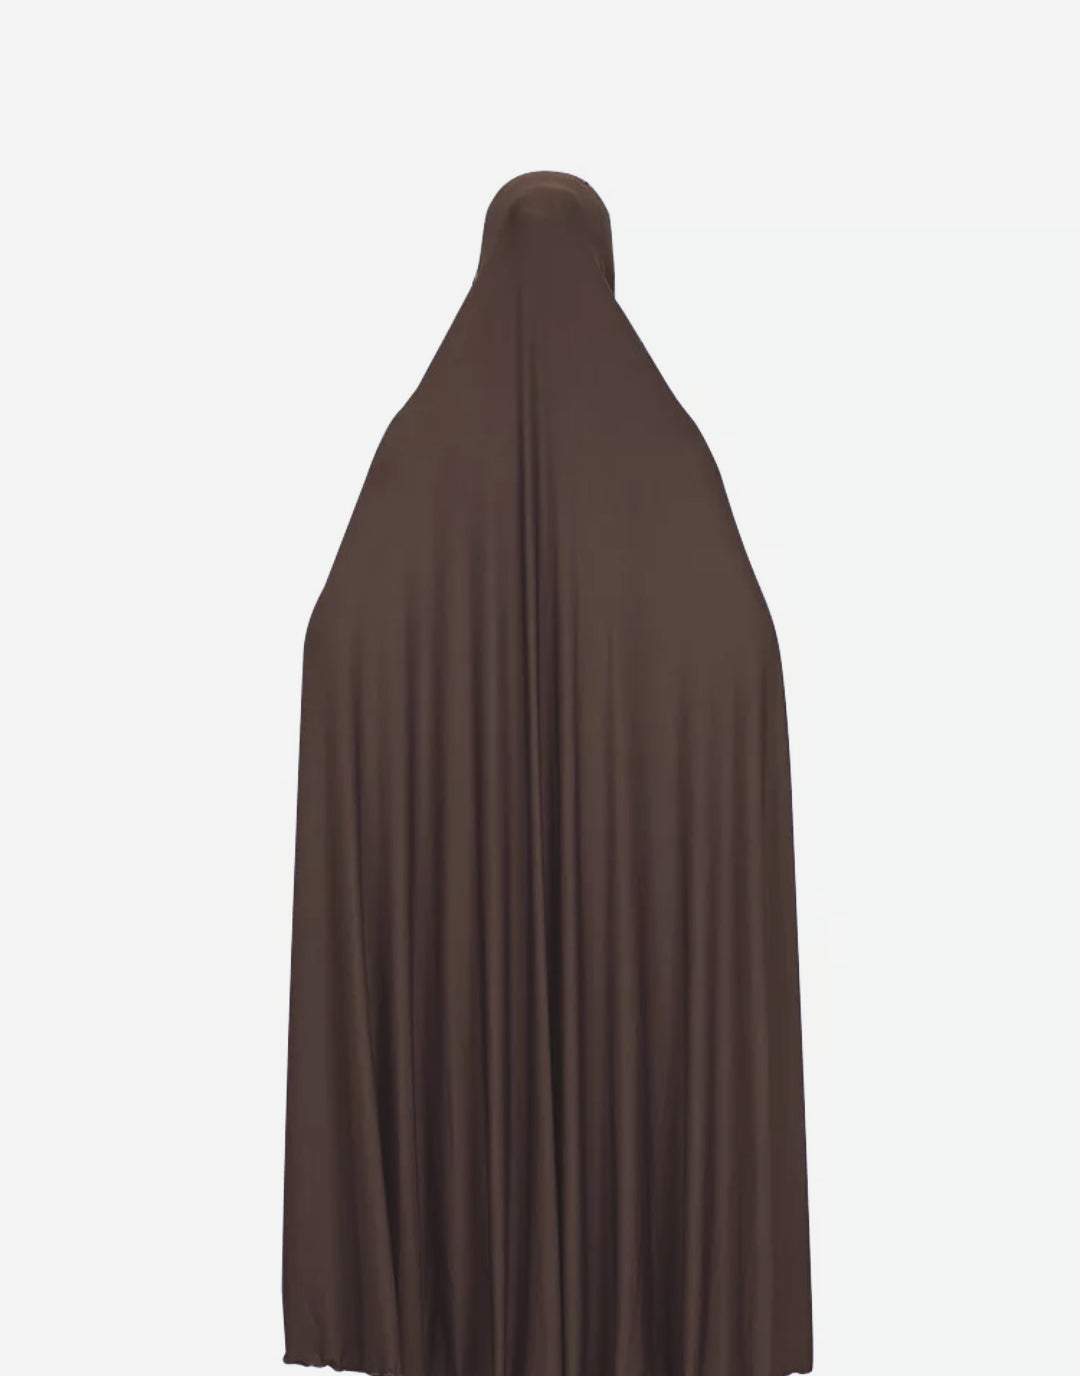 Discover our exquisite Lightweight Brown Jilbab crafted for modest clothing enthusiasts. Elevate your wardrobe with comfort and style. Shop now at Hikmah Boutique.